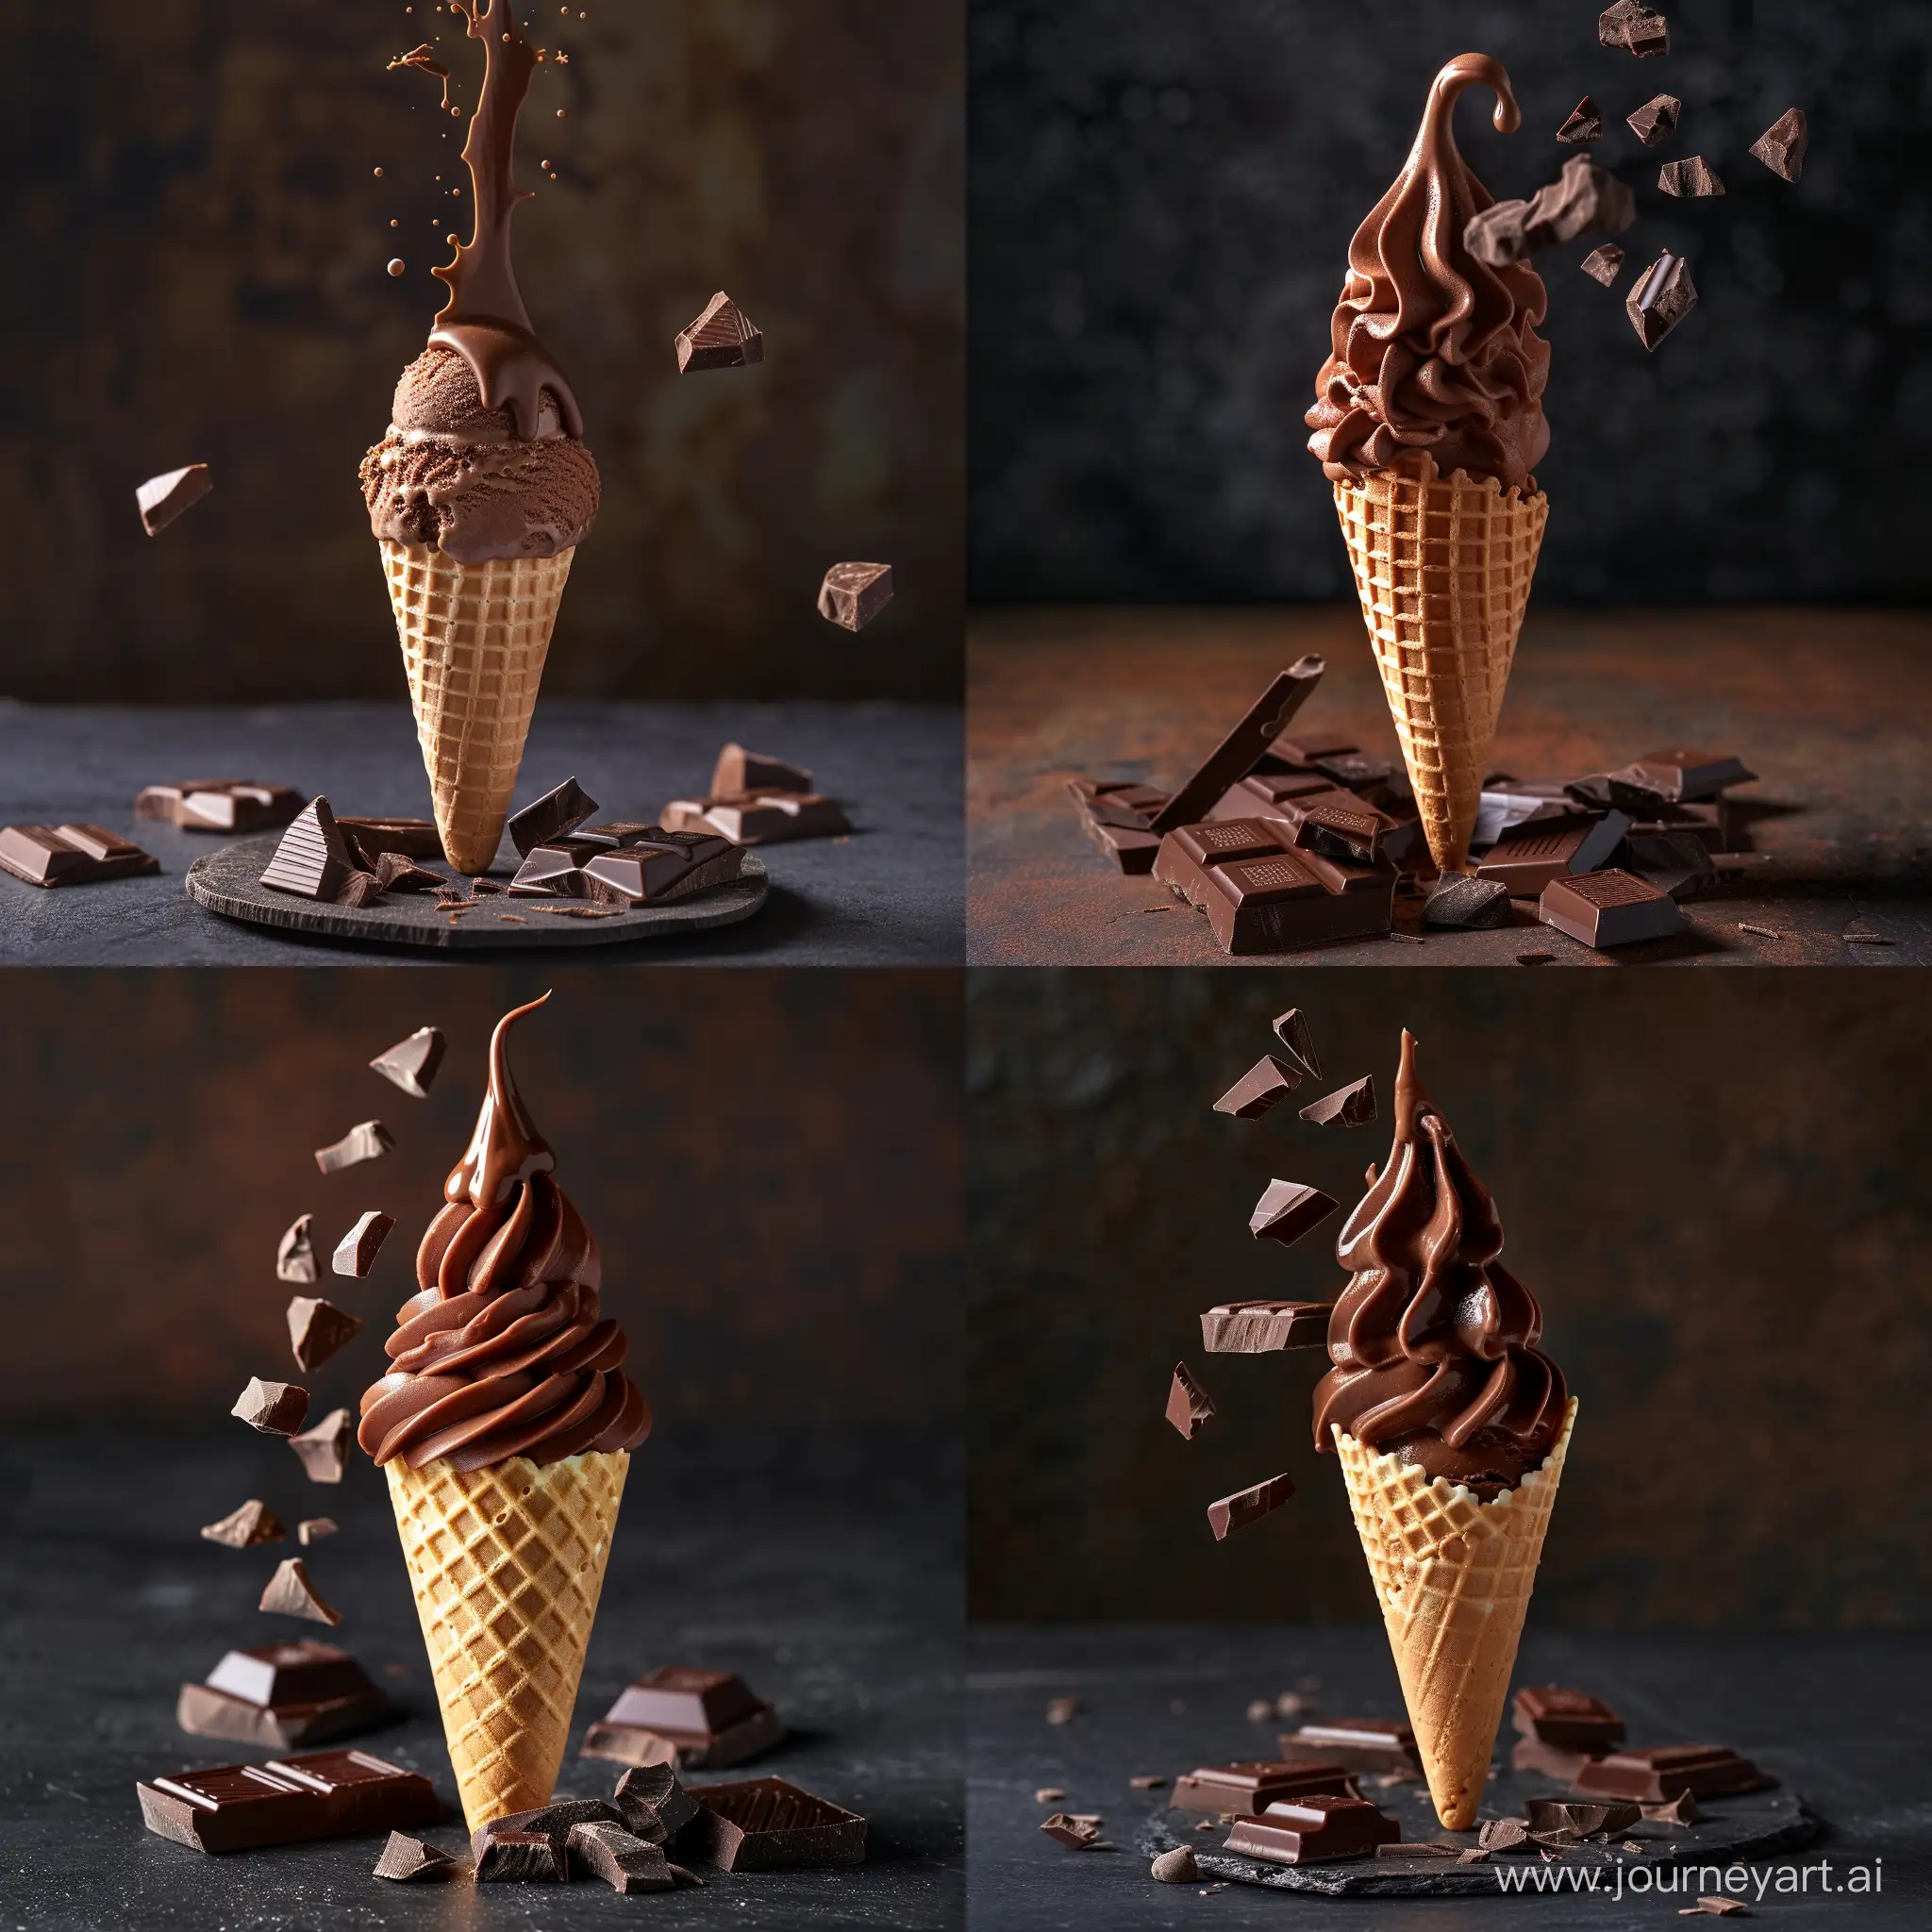 Energetic-Chocolate-Ice-Cream-Cone-with-Falling-Icing-and-Chocolate-Pieces-on-Dark-Background